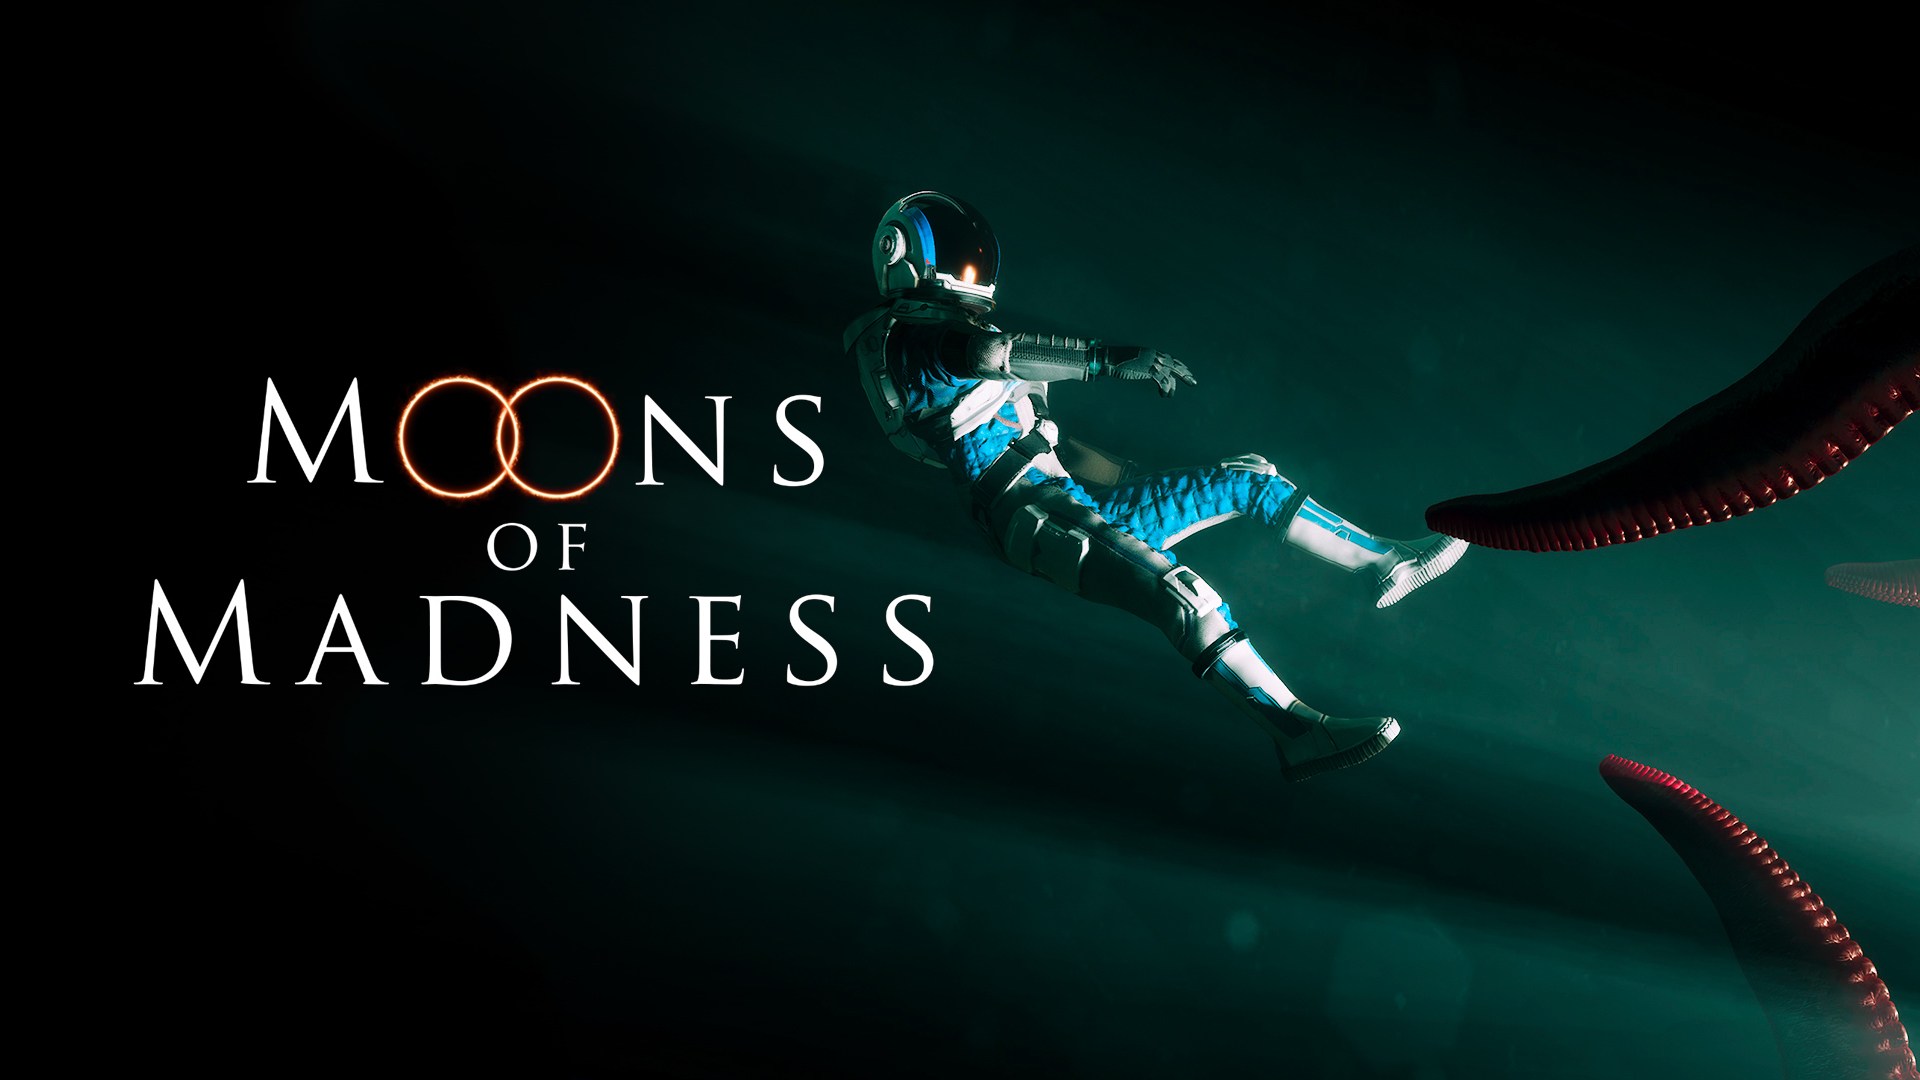 download moons of madness steam